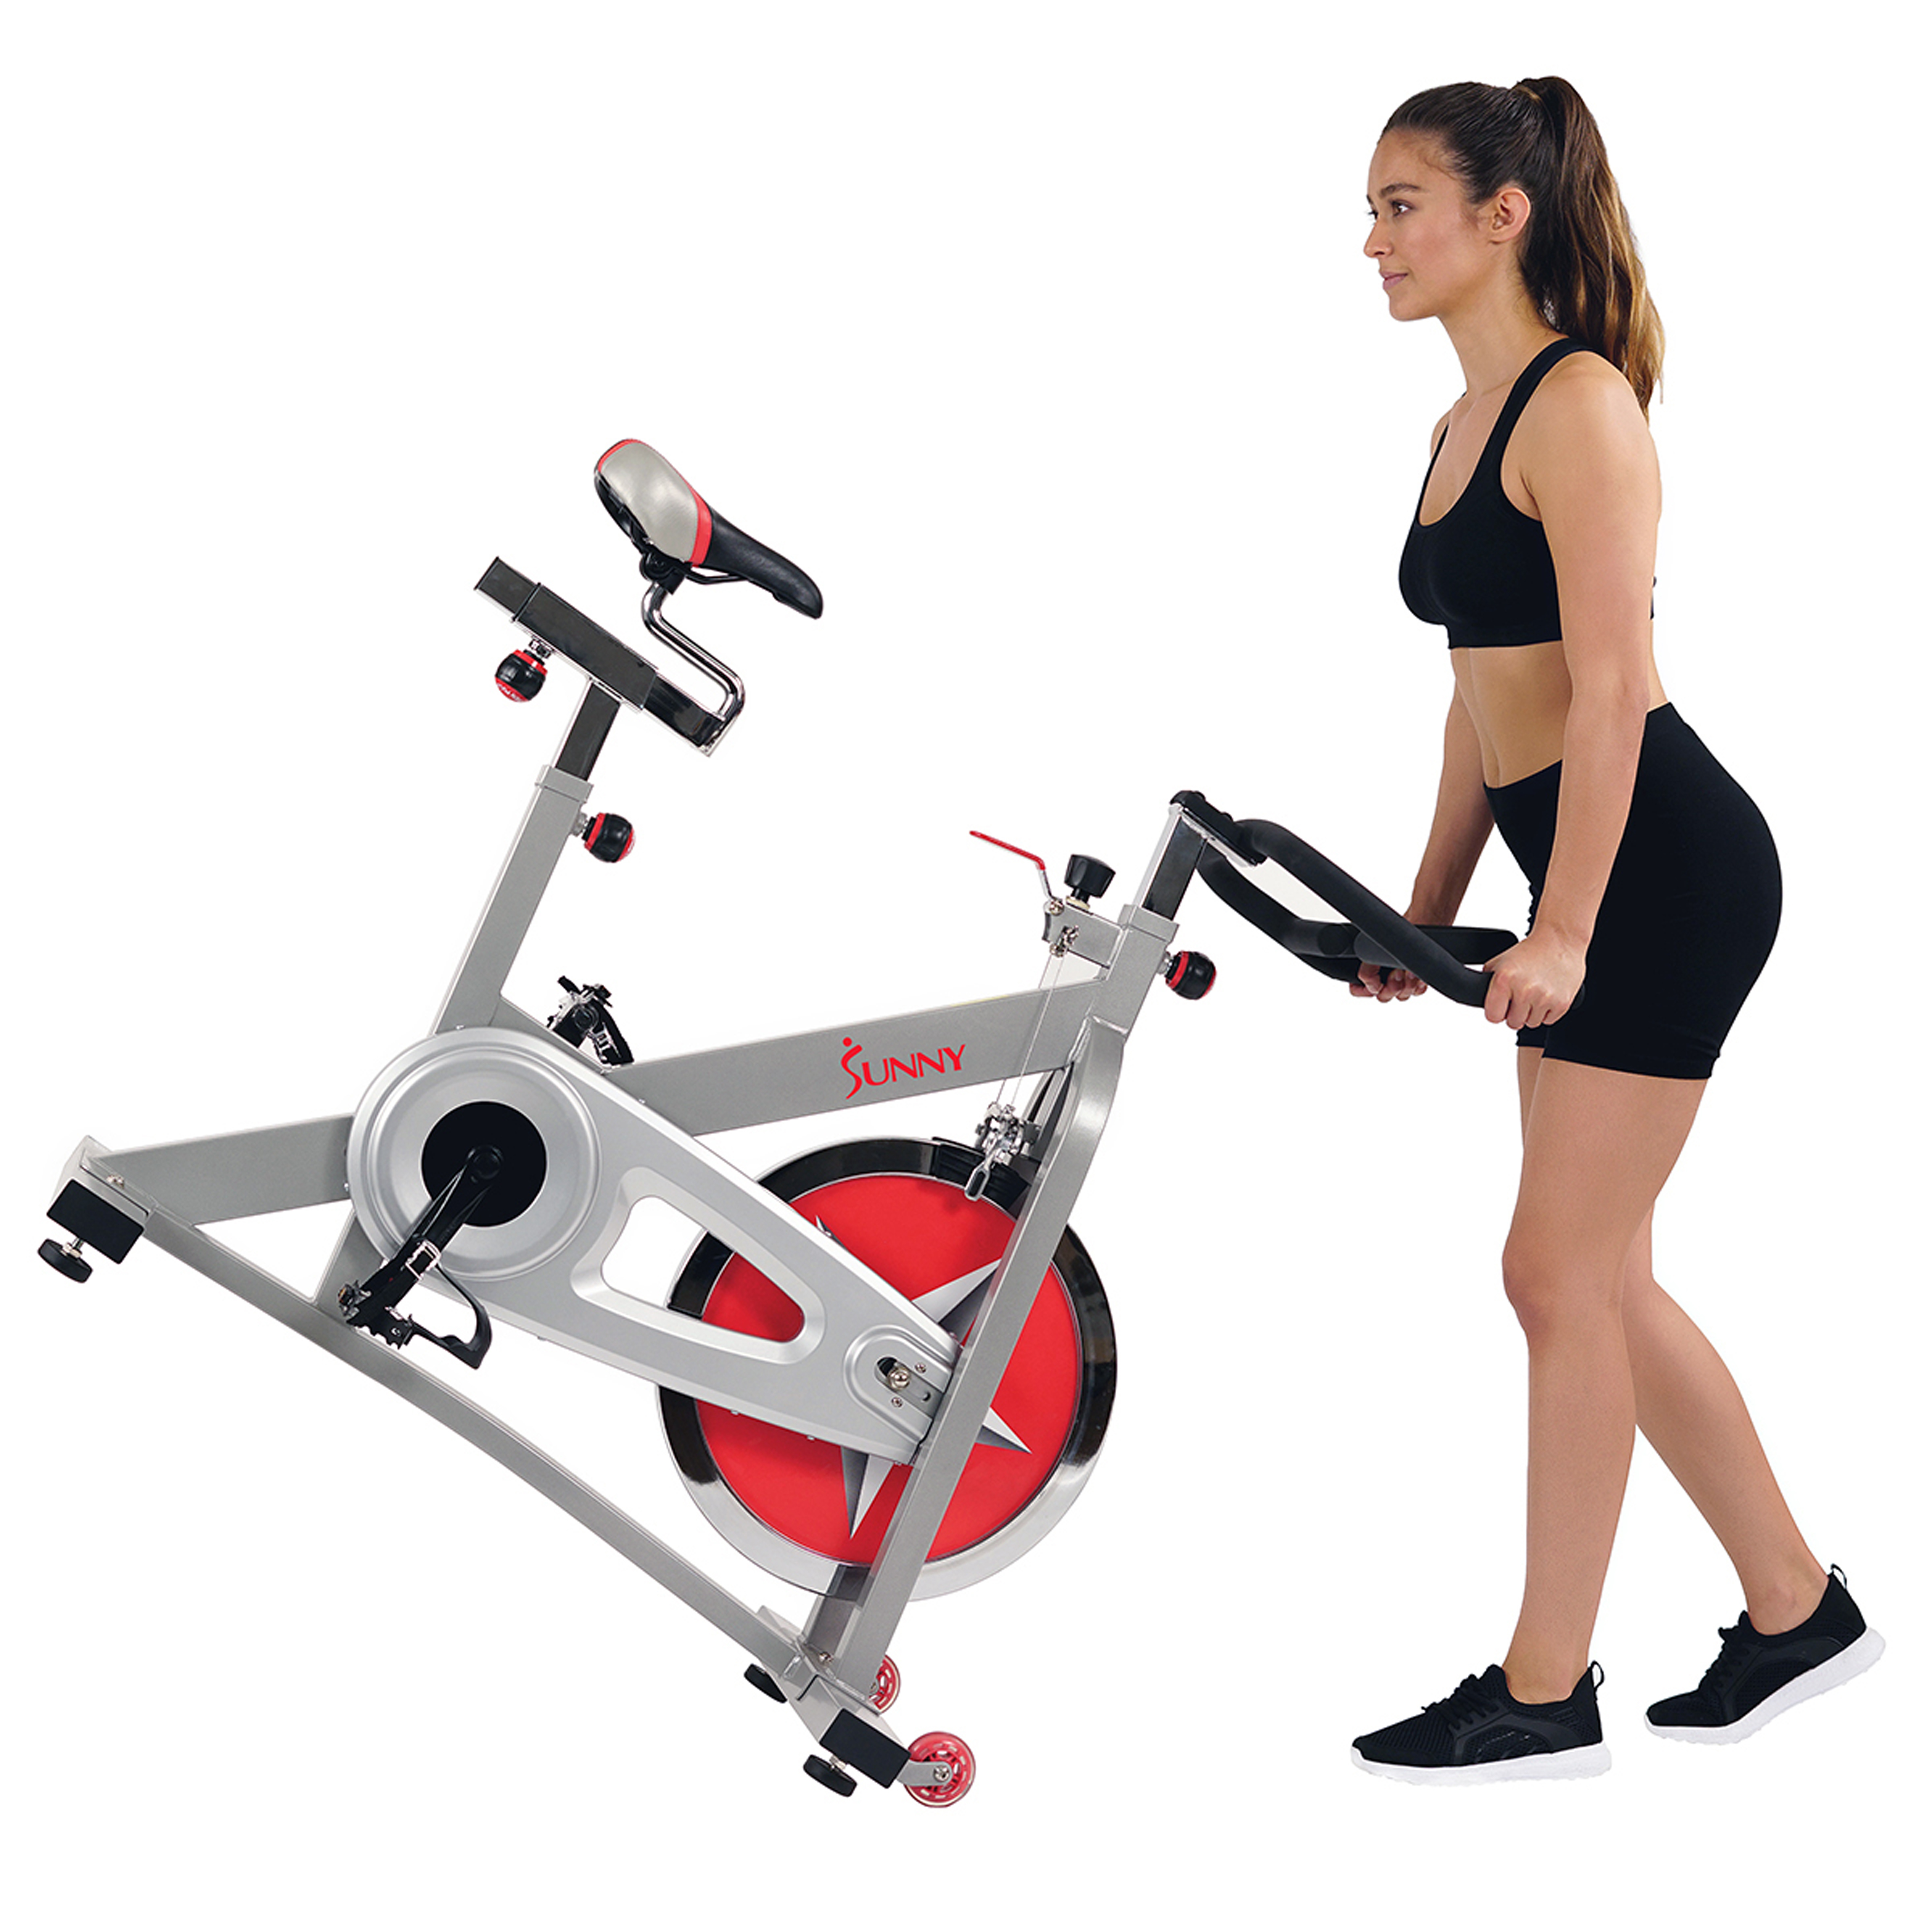 Sunny Health & Fitness Stationary Chain Drive 40 lb Flywheel Pro Indoor Cycling Exercise Bike Trainer, Workout Machine, SF-B901 - image 8 of 9